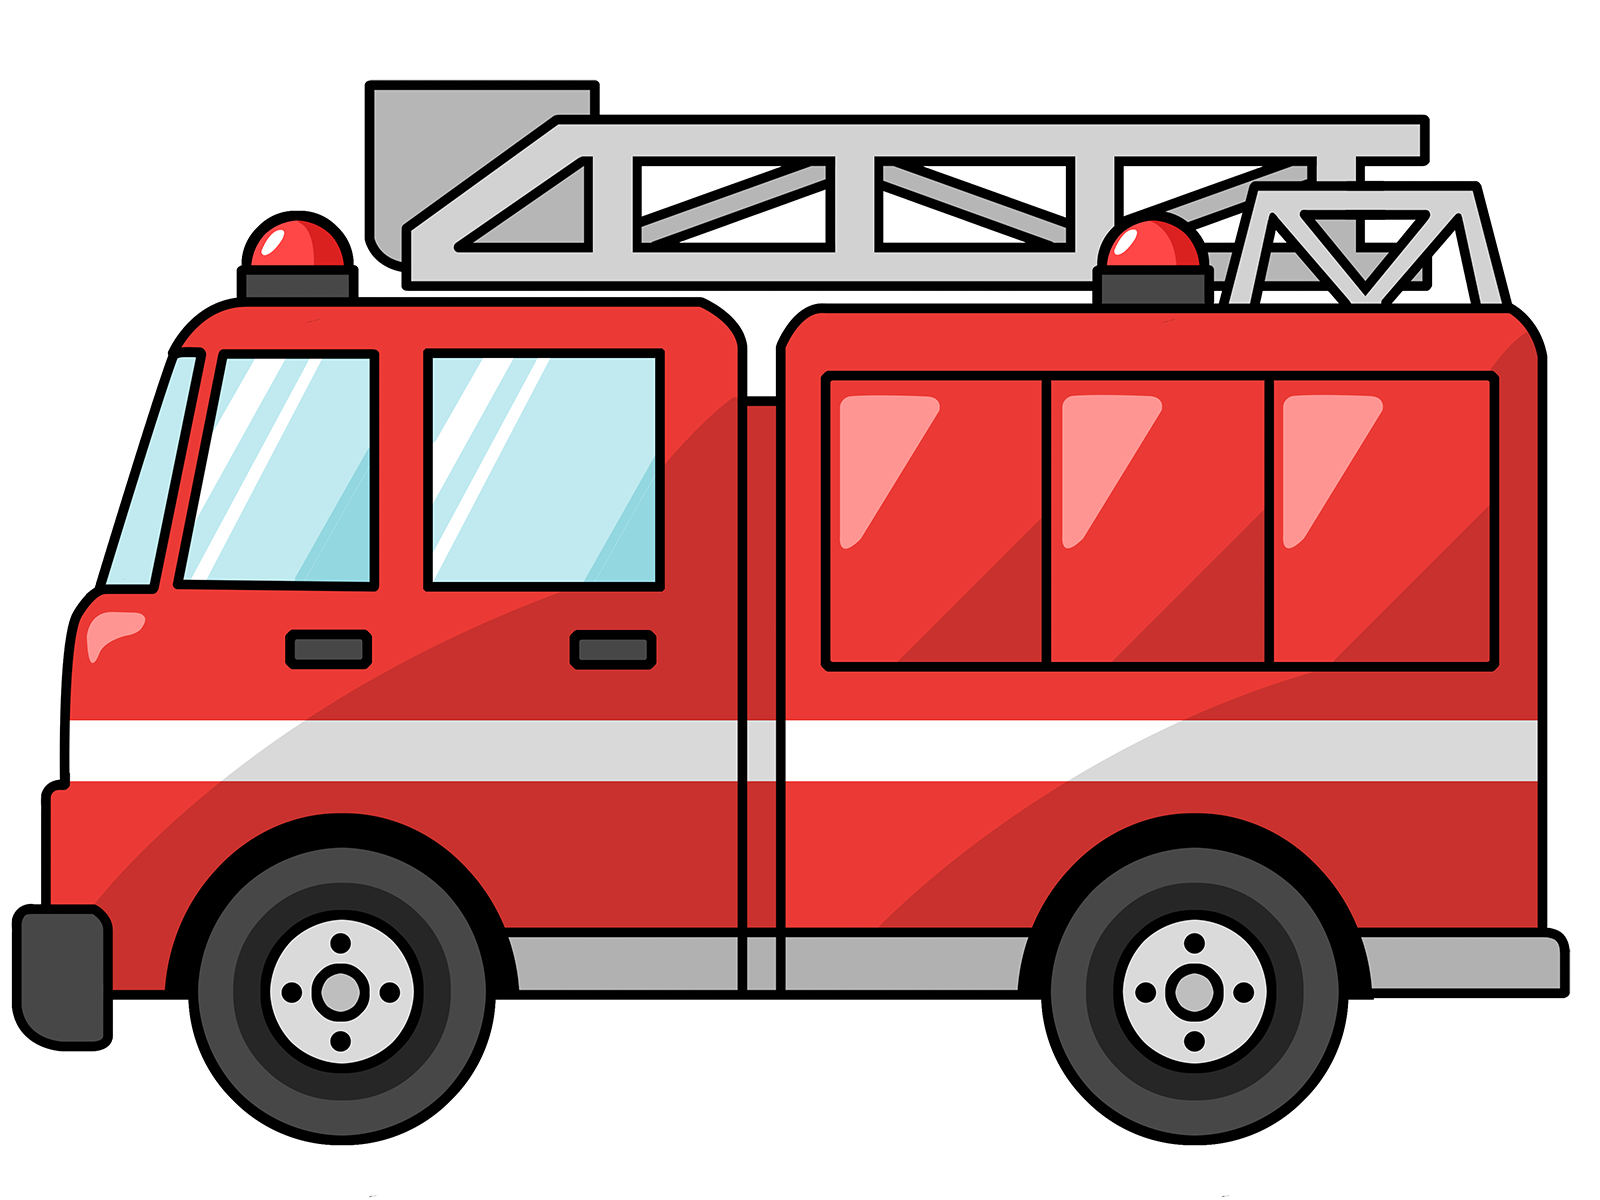 Fire Engine Clipart Image Red